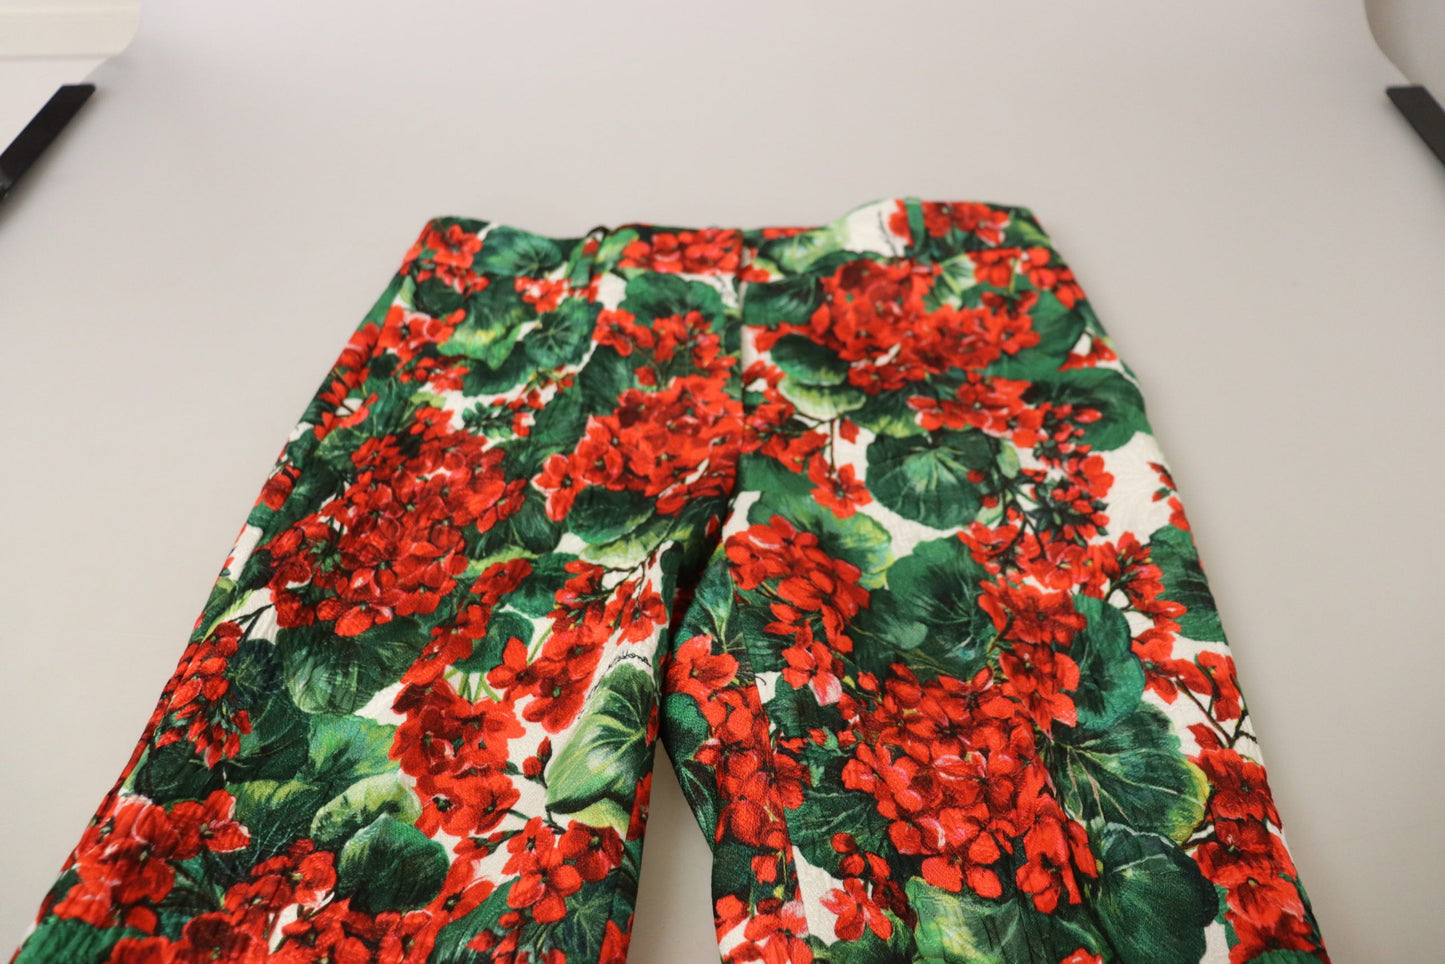 Dolce & Gabbana Chic Cropped Mid Waist Pants - Multicolor